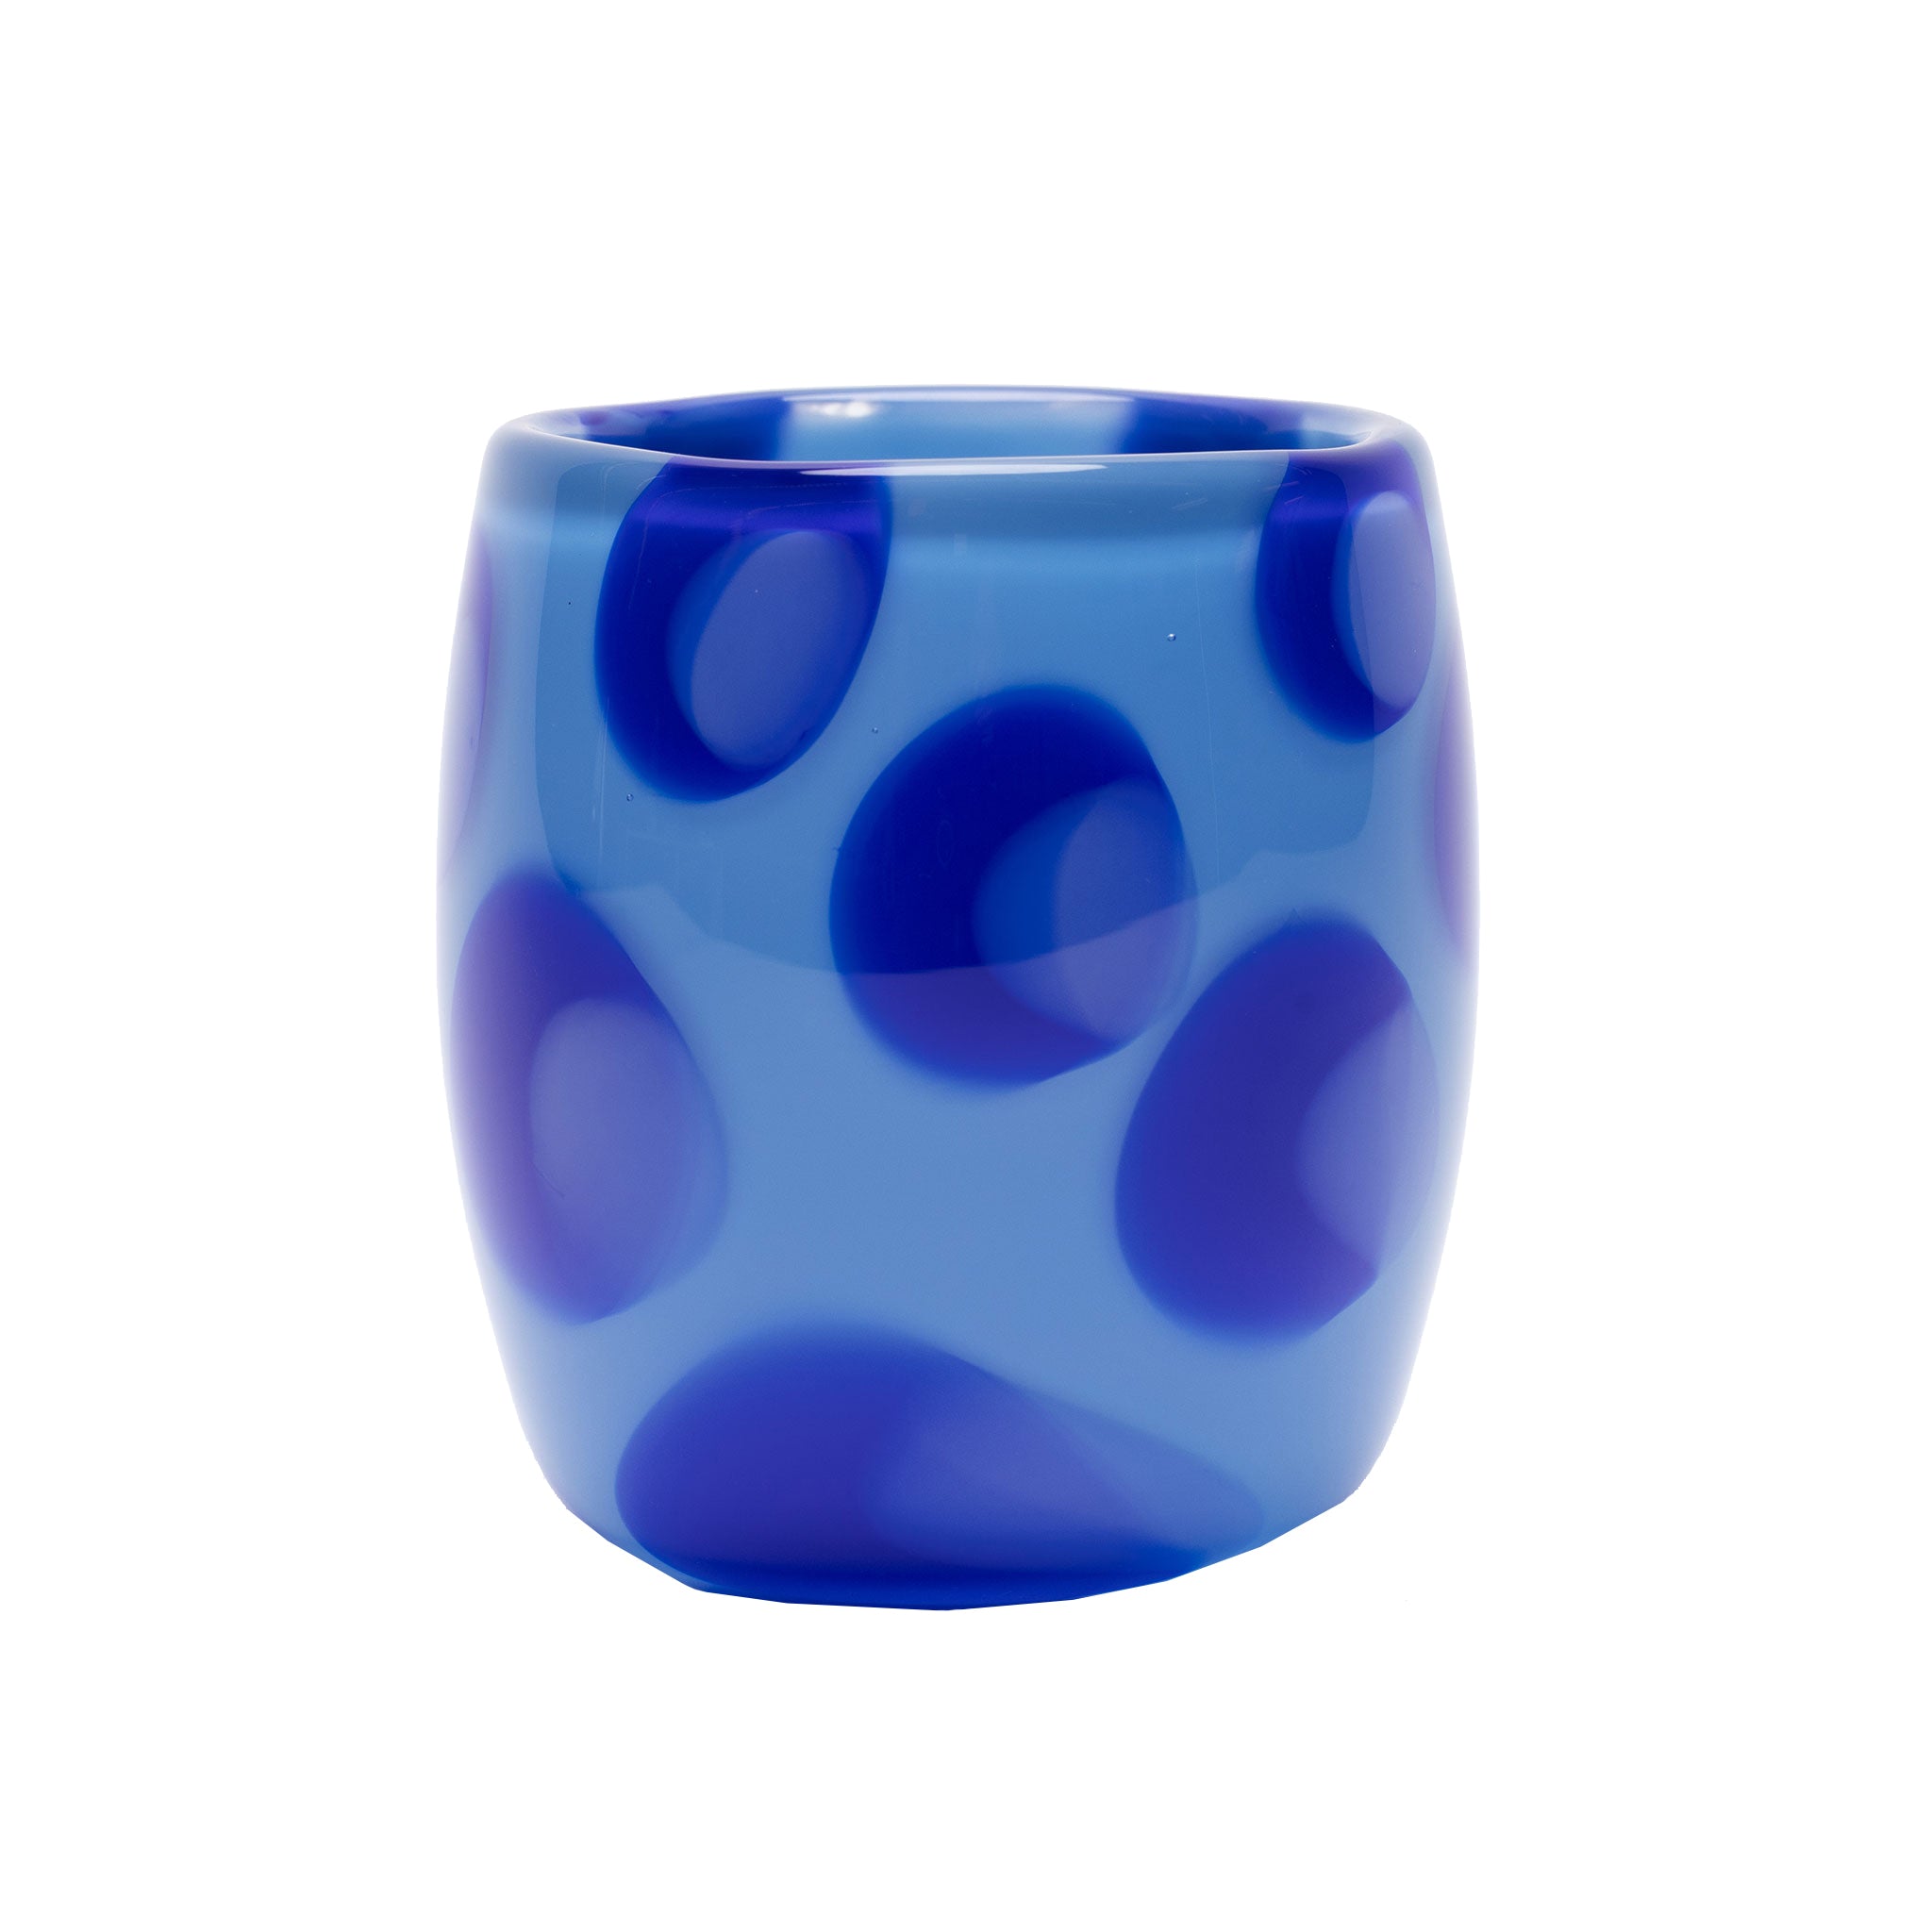 Blue Vase with Royal Blue and Light Blue Spots